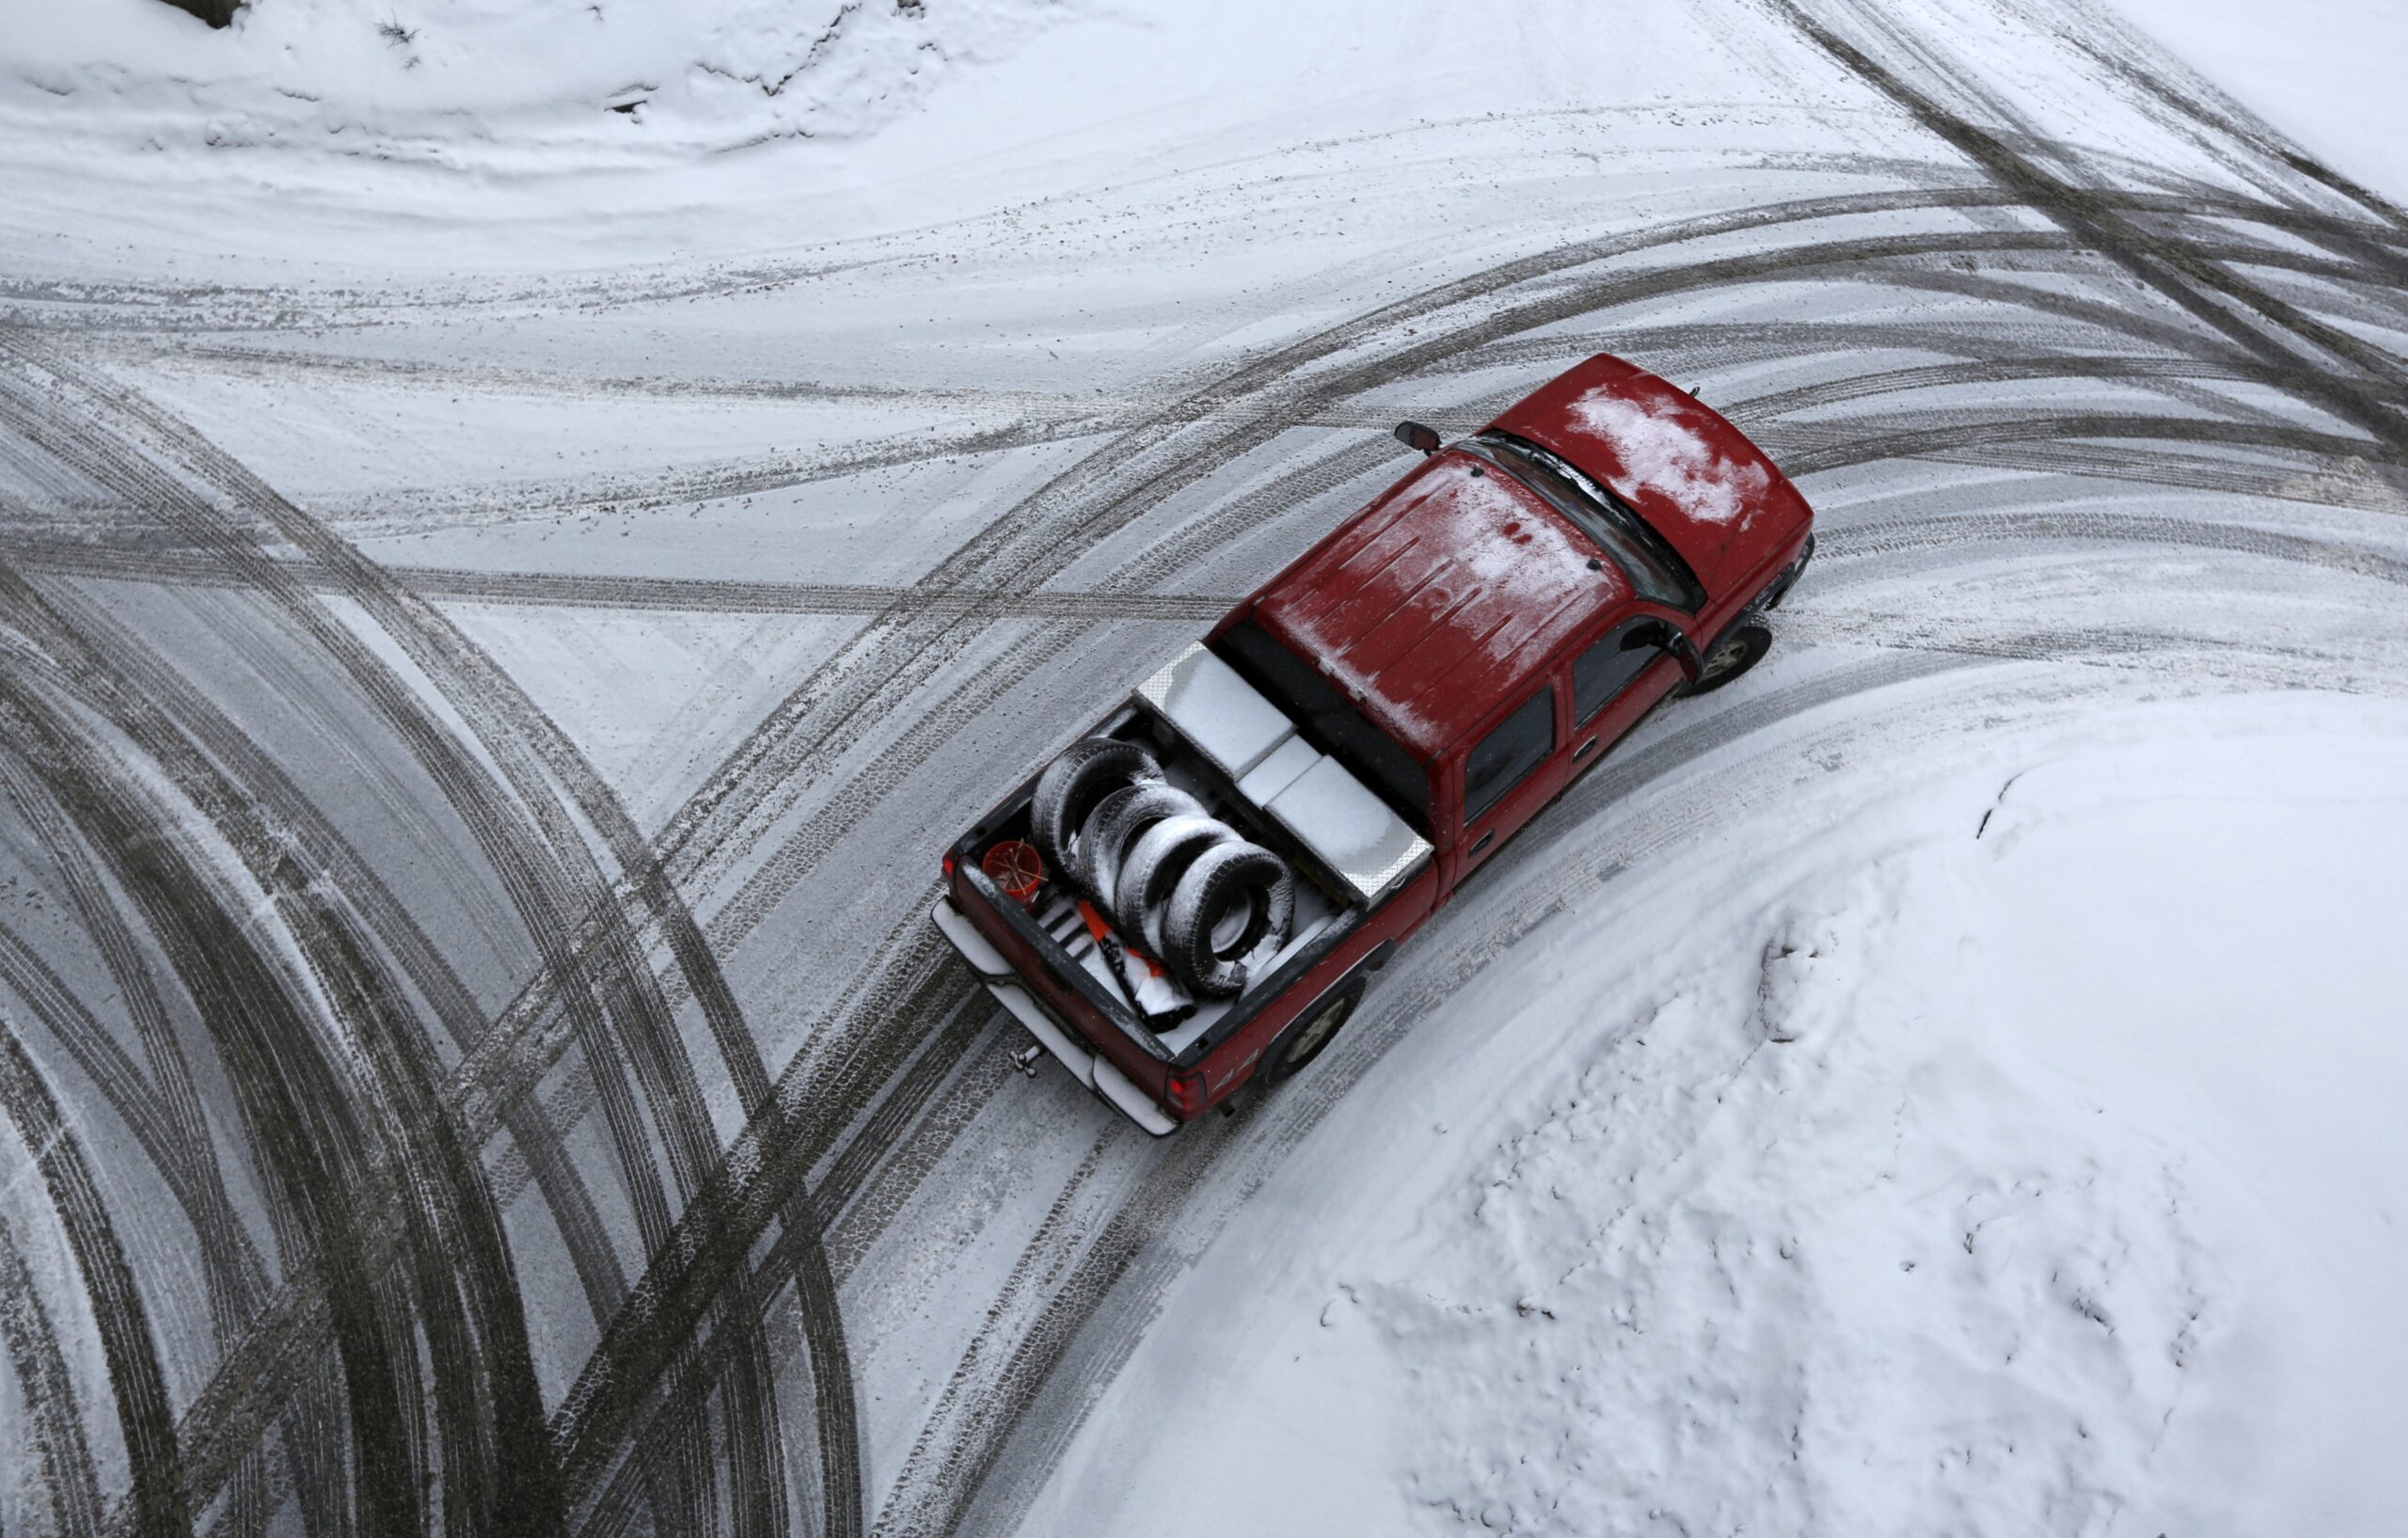 driving in the snow